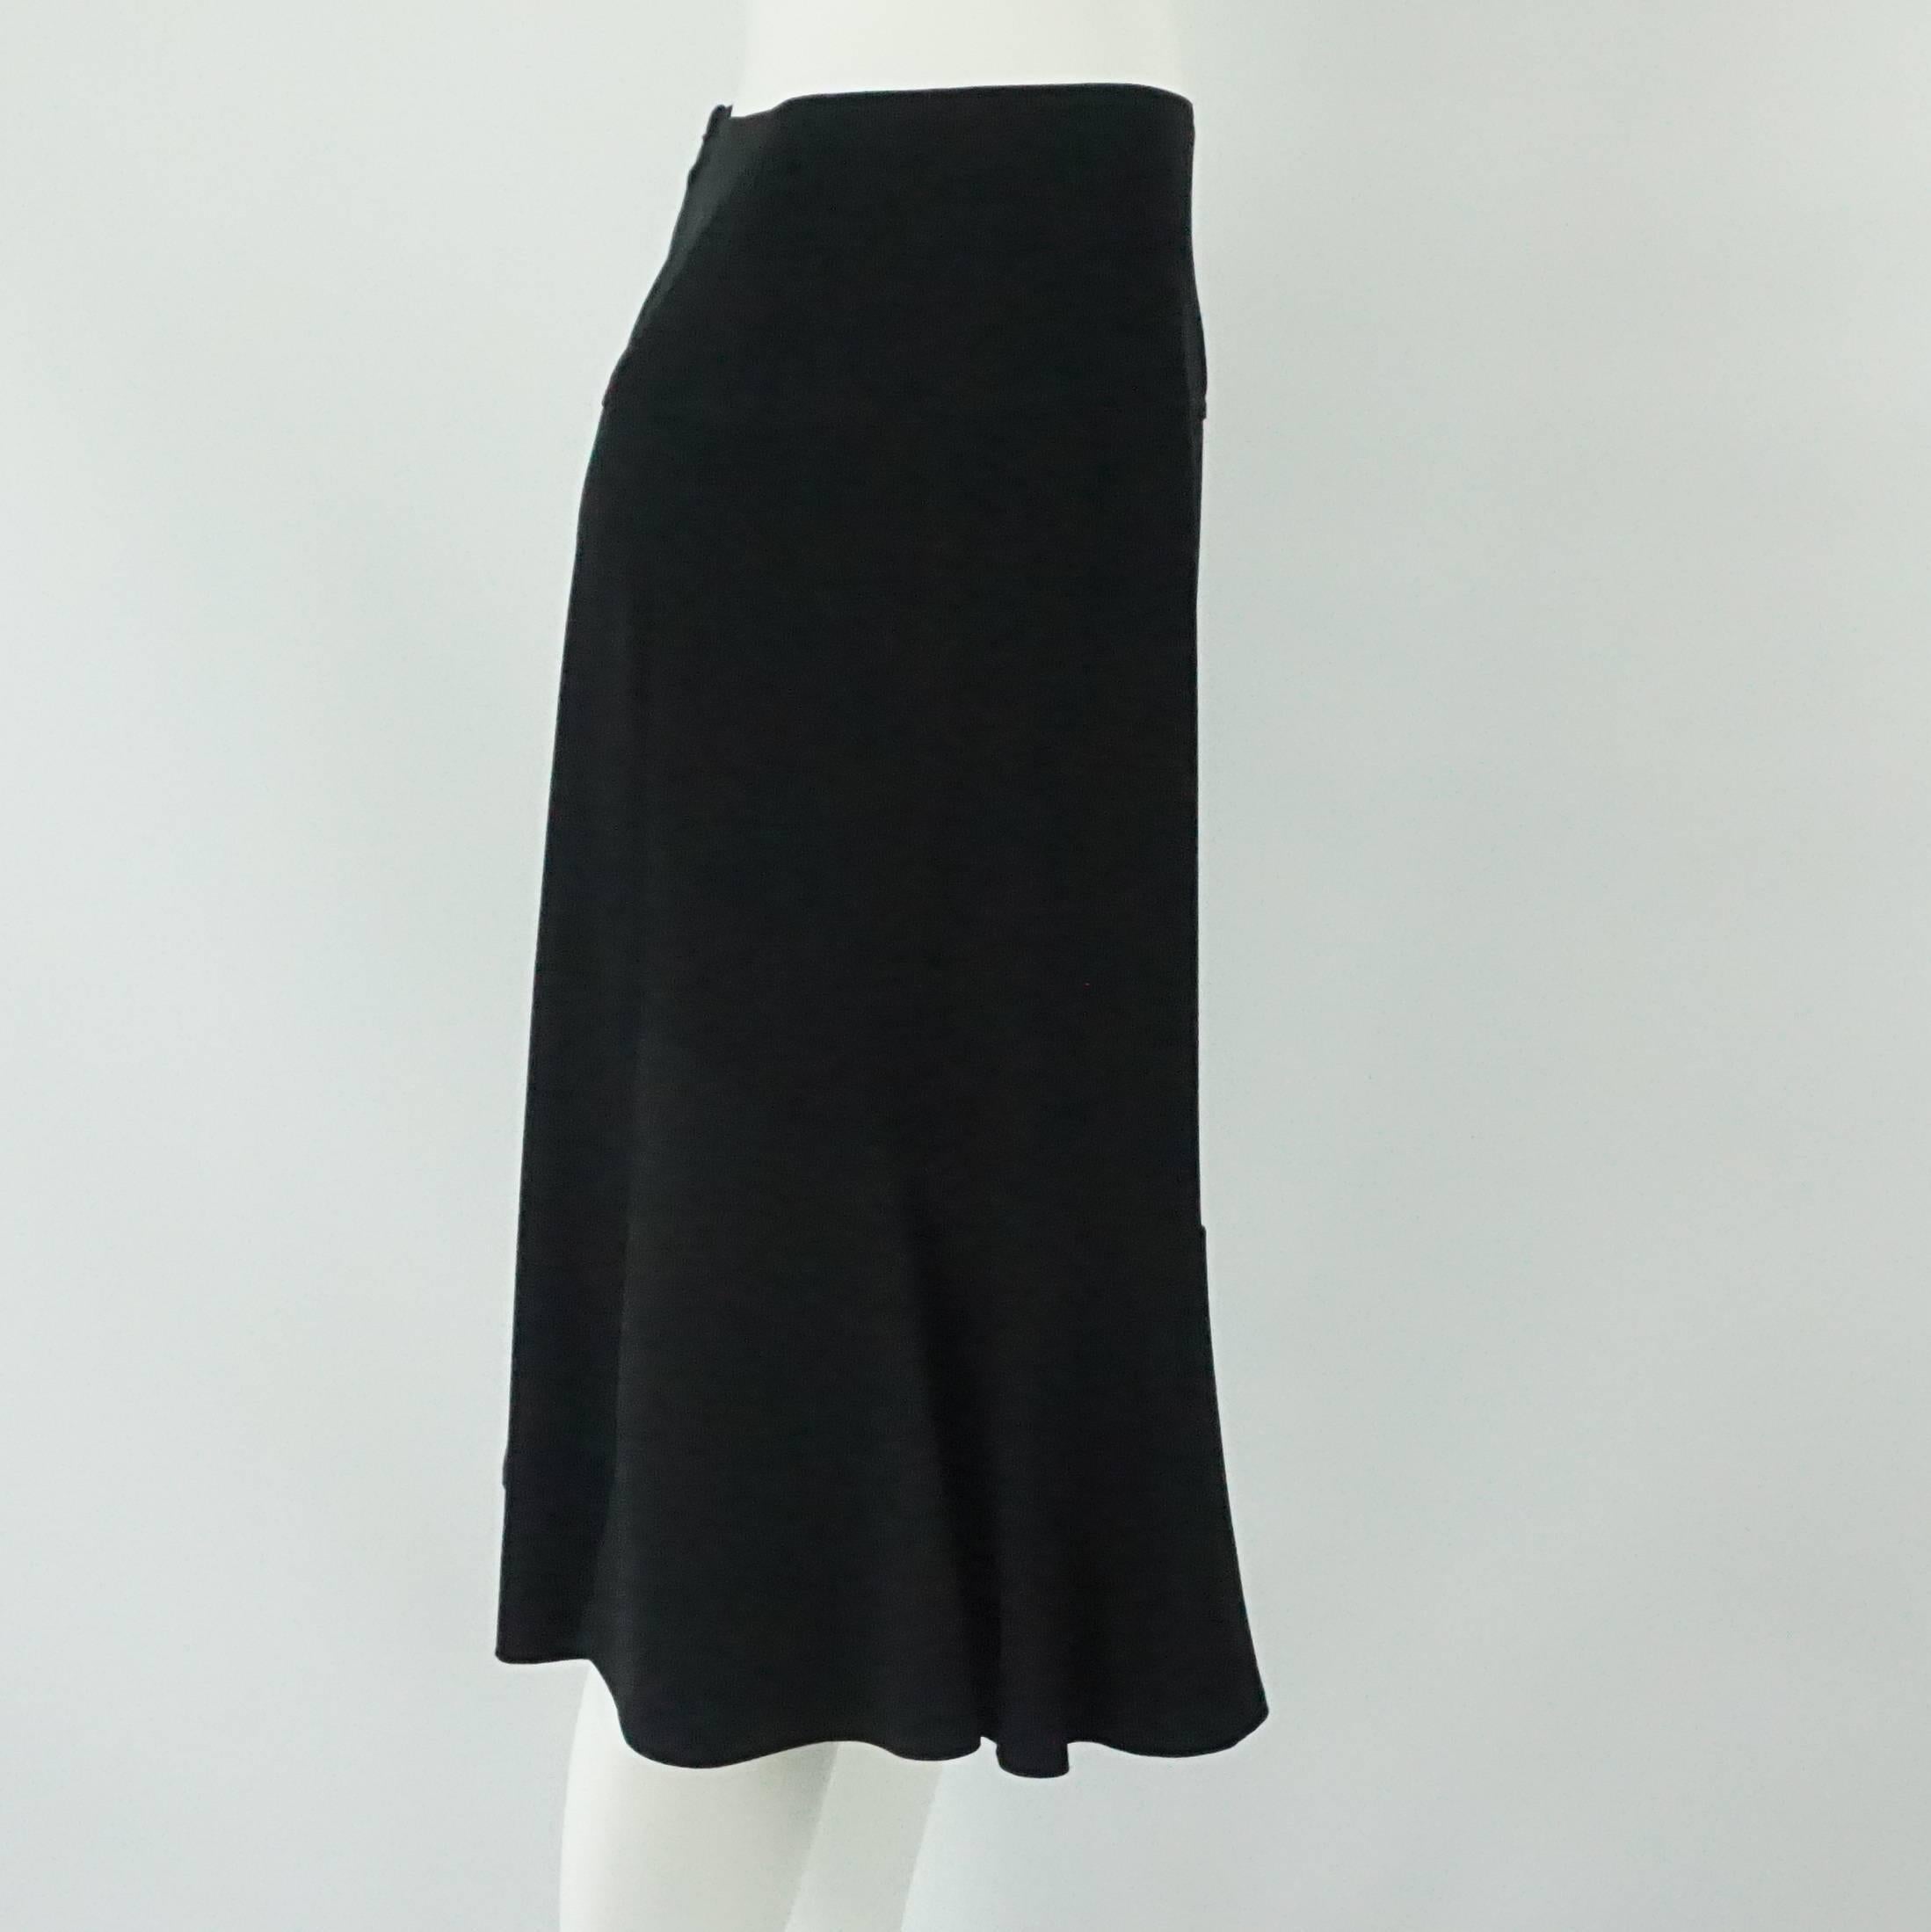 Chanel Black Silk Skirt - 44. This Chanel skirt is made of black silk. It has a flowing structure. The skirt is in excellent condition and a size 44.
Measurements
Waist: 29